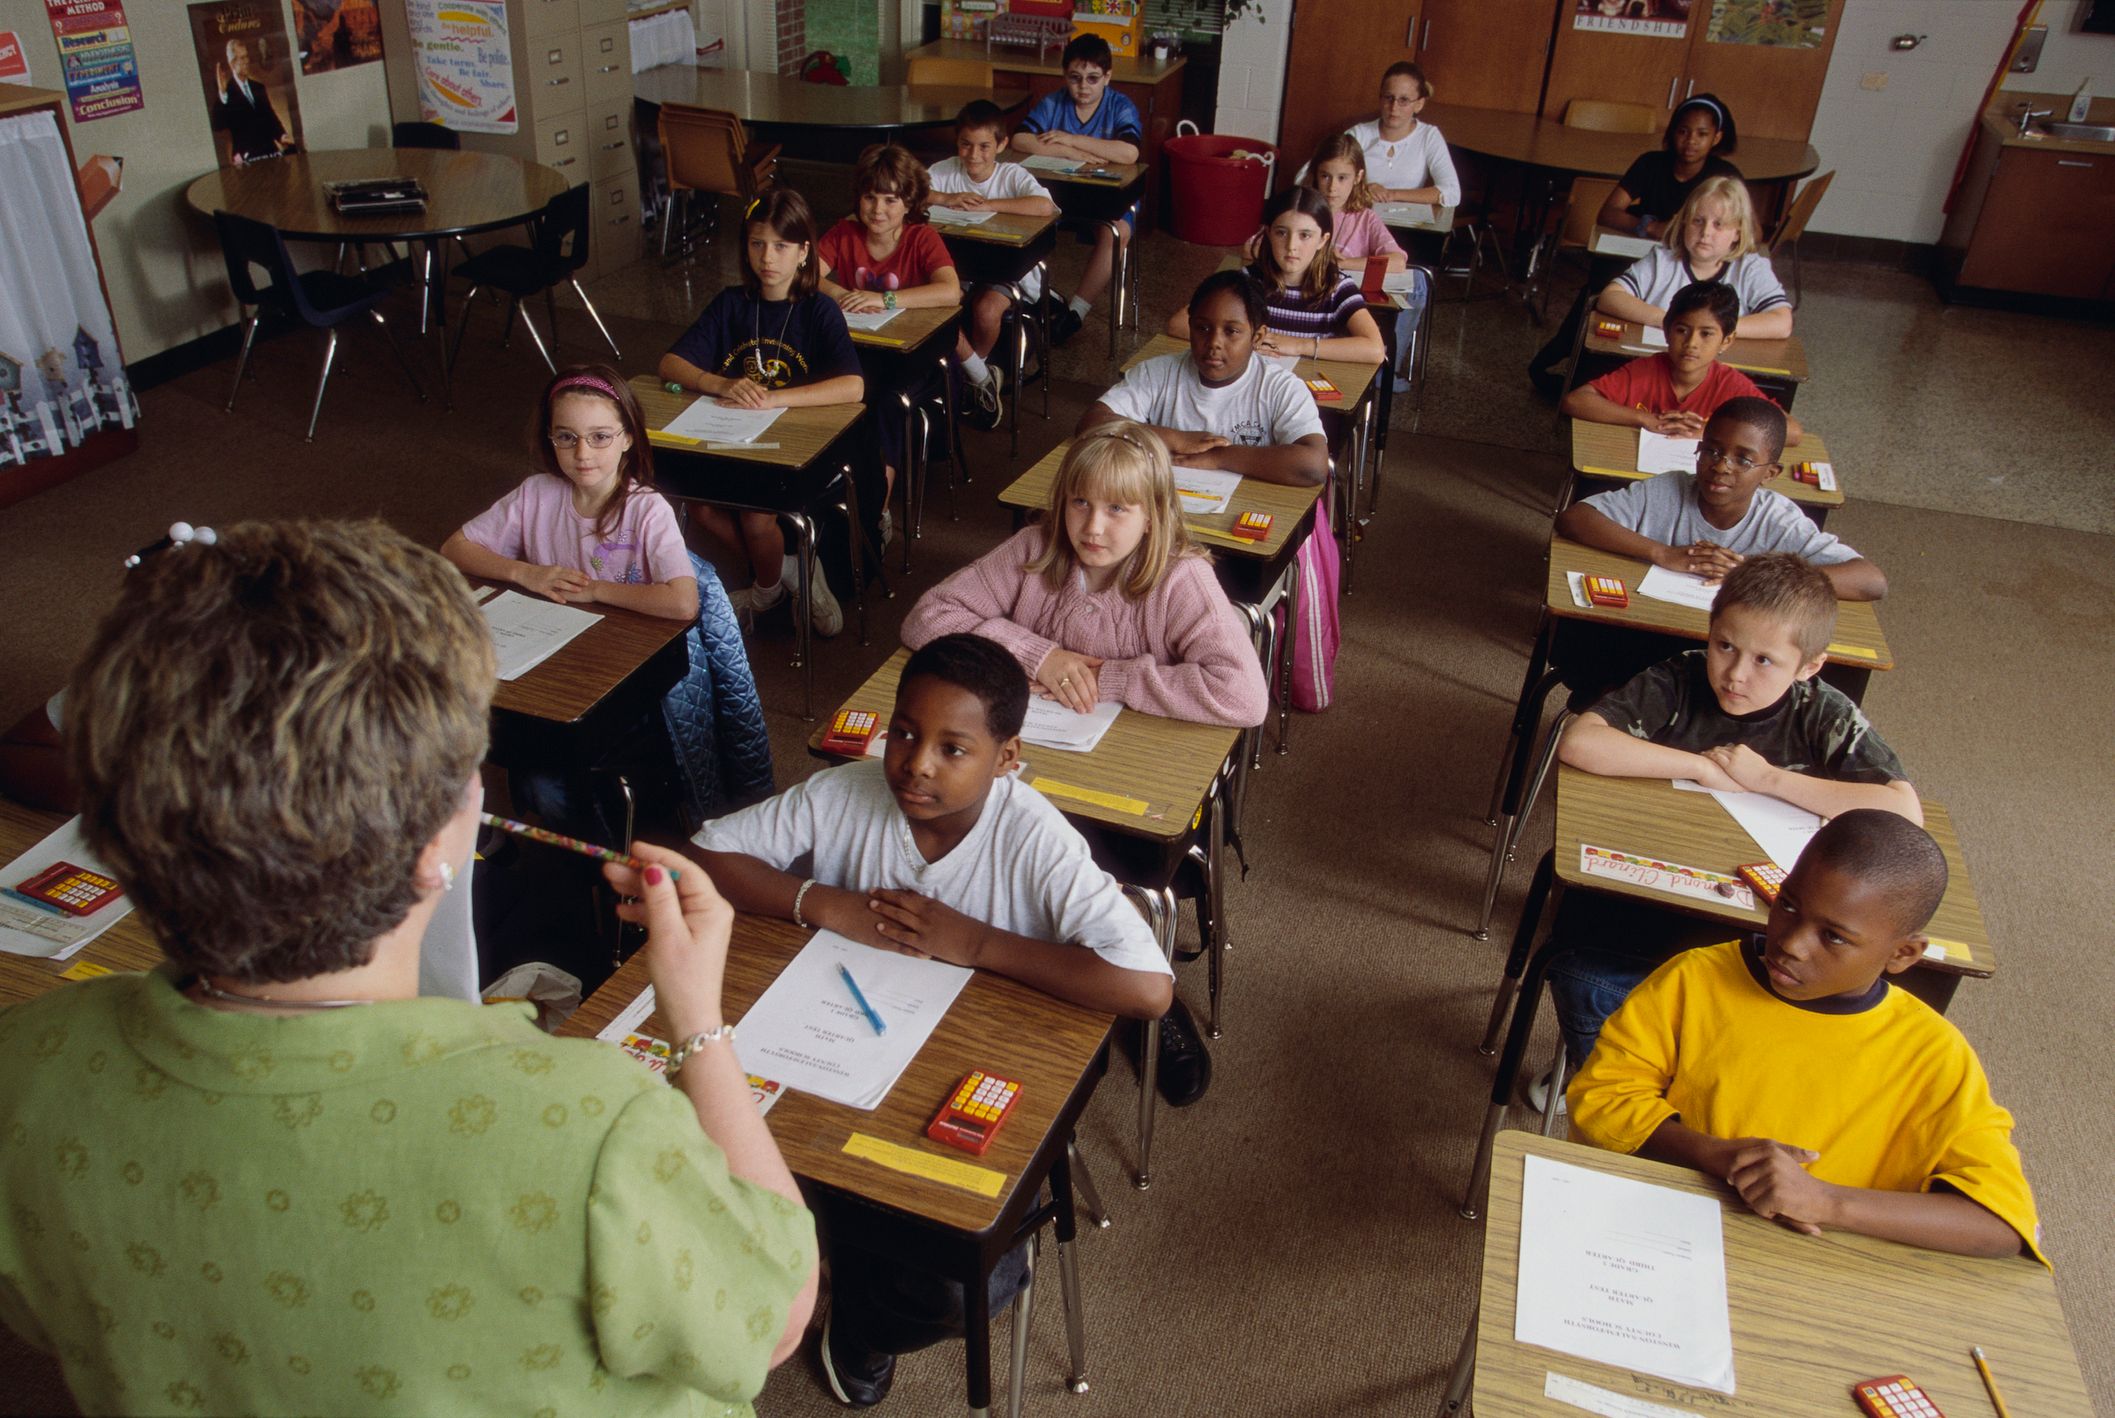 Teacher Going over Exam Instructions | Getty Images